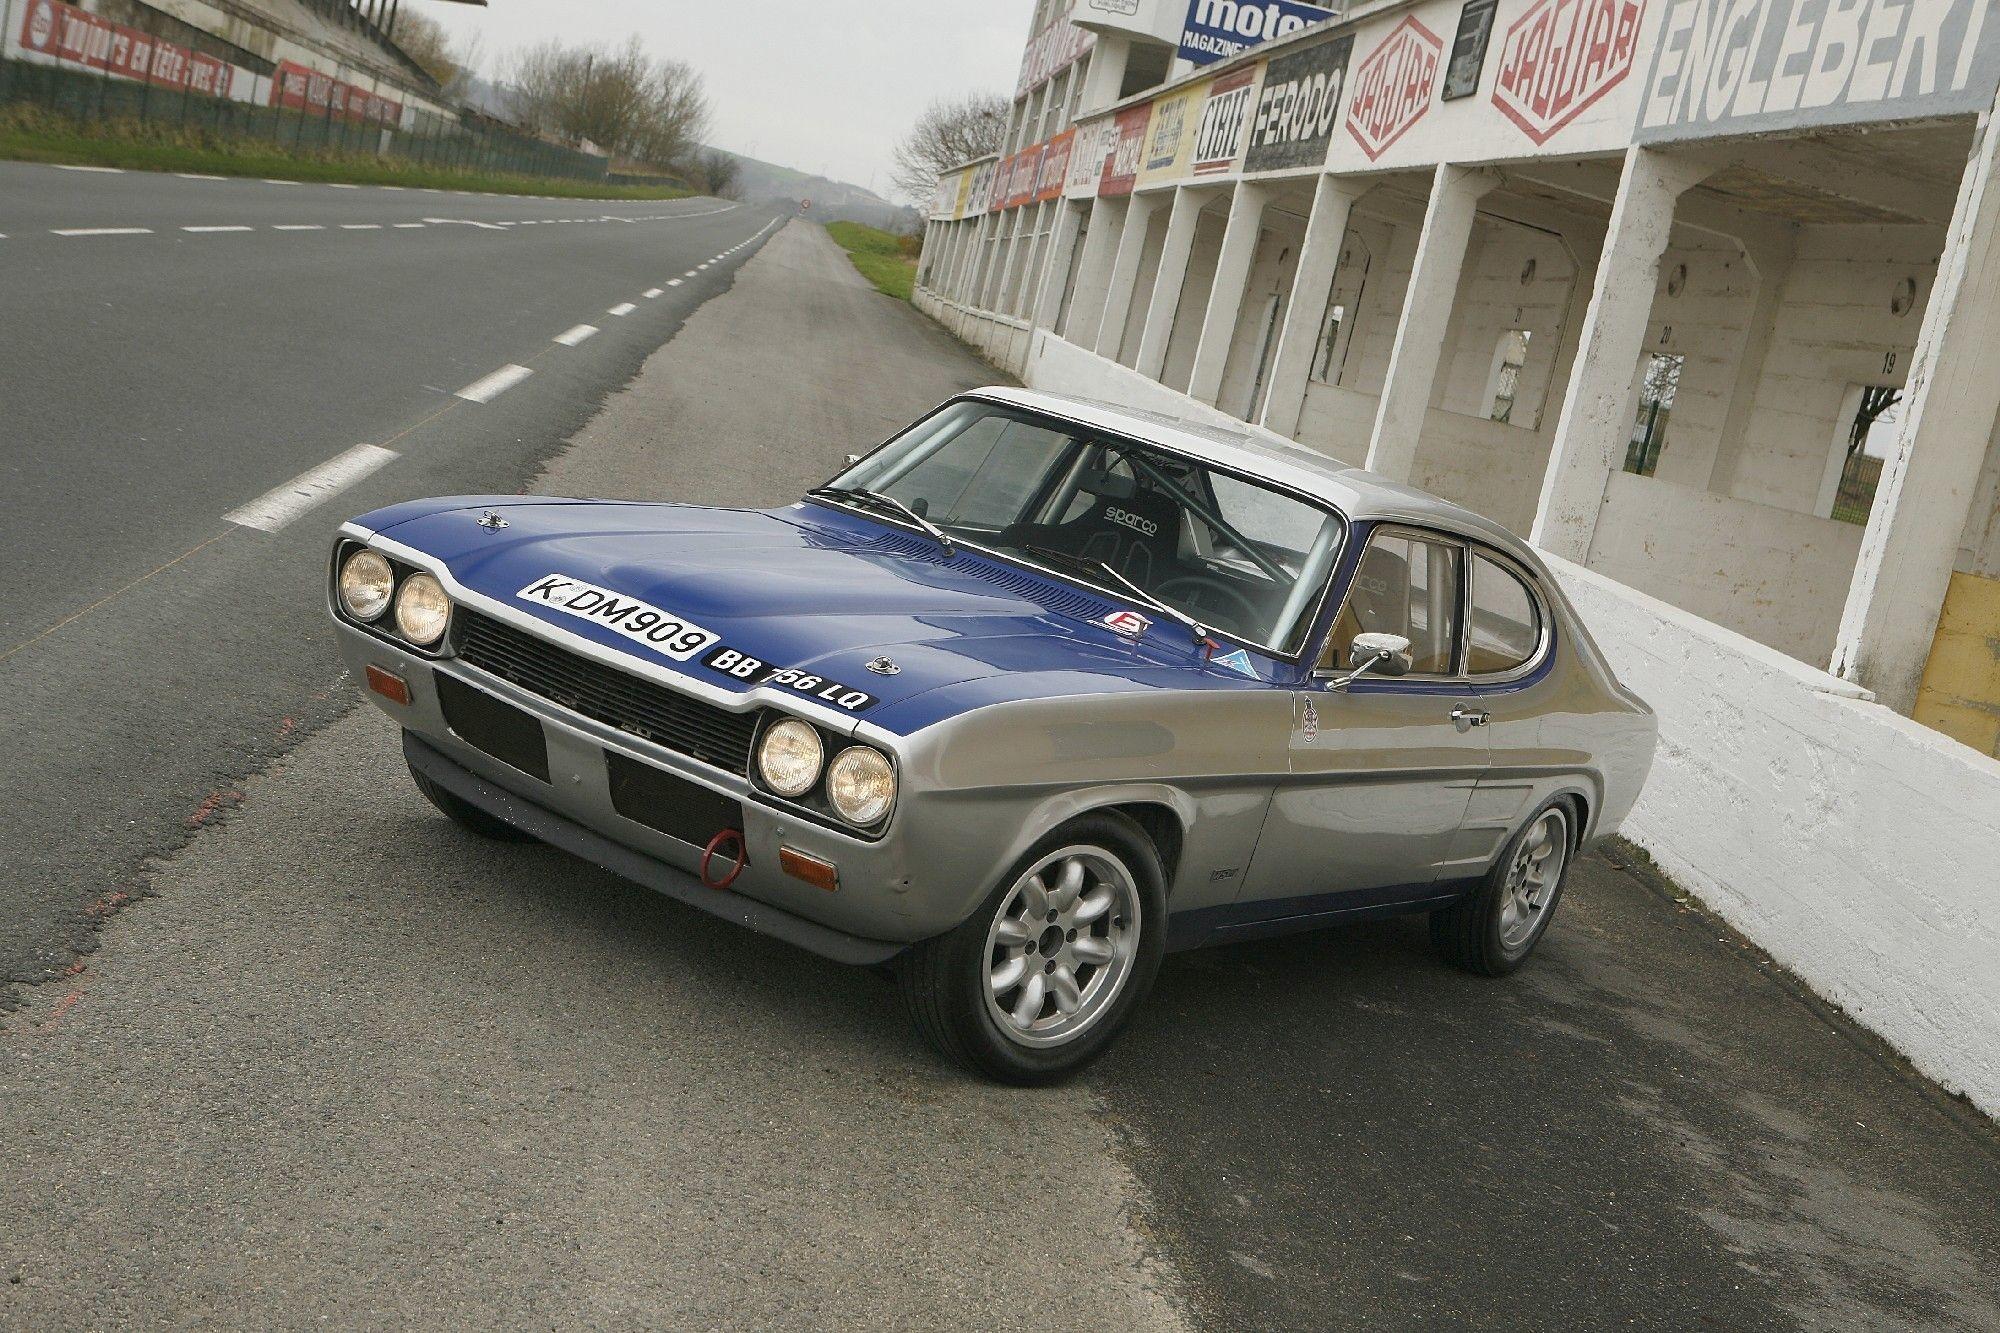 1971 Ford Capri RS 2600 Competition Coupé, 1971 Ford Capri RS 2600 Competition Coupé, ford, Ford Capri